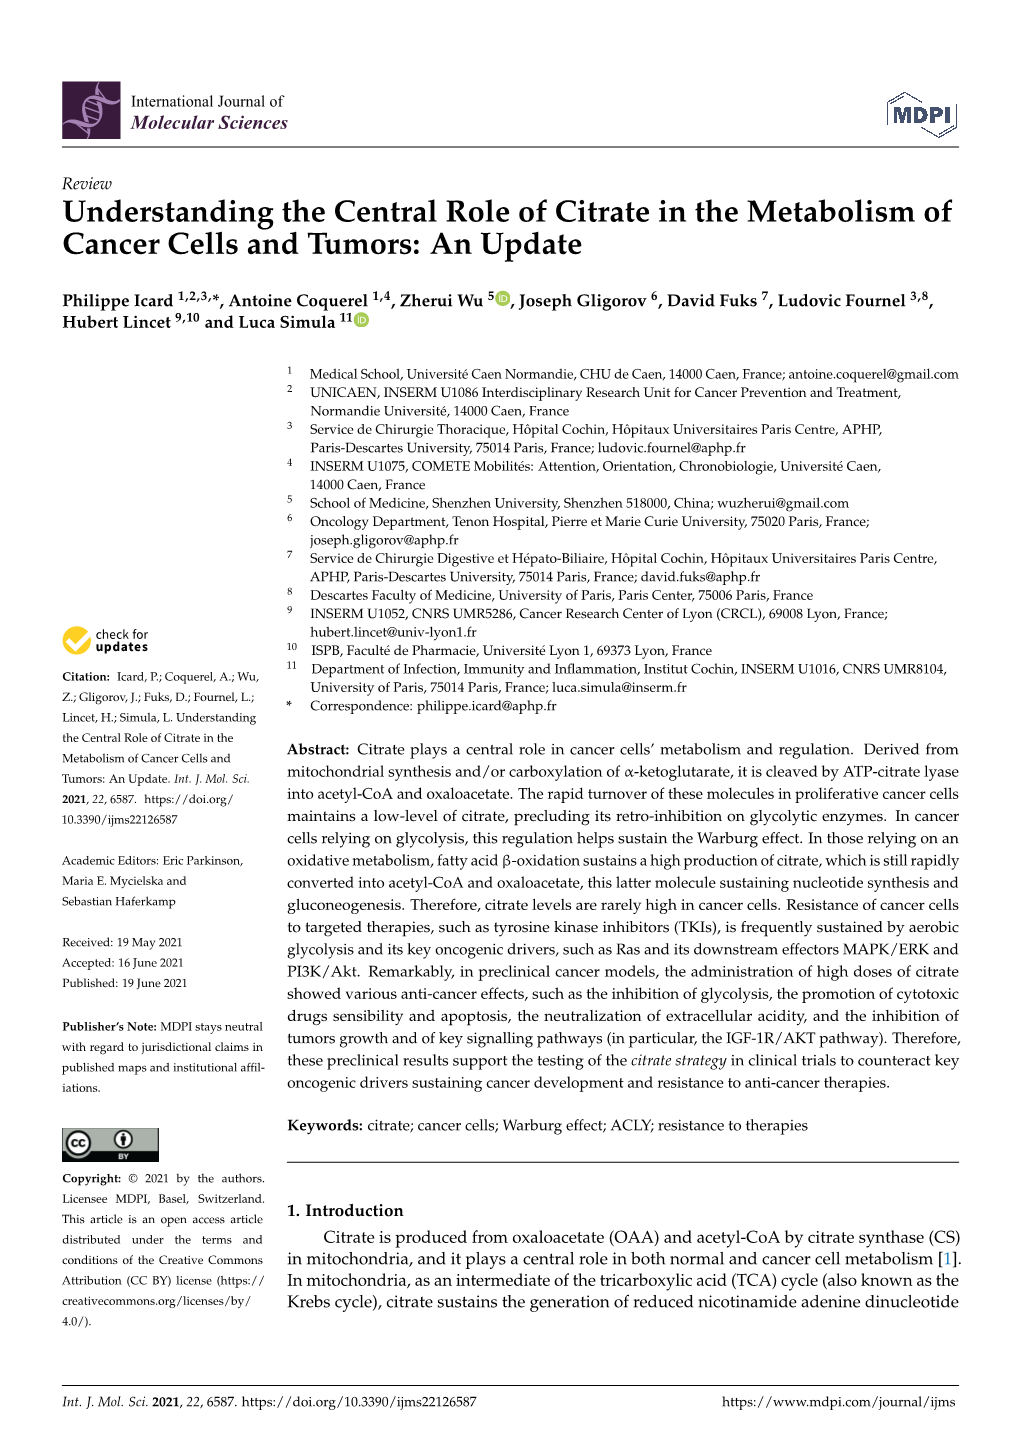 Understanding the Central Role of Citrate in the Metabolism of Cancer Cells and Tumors: an Update